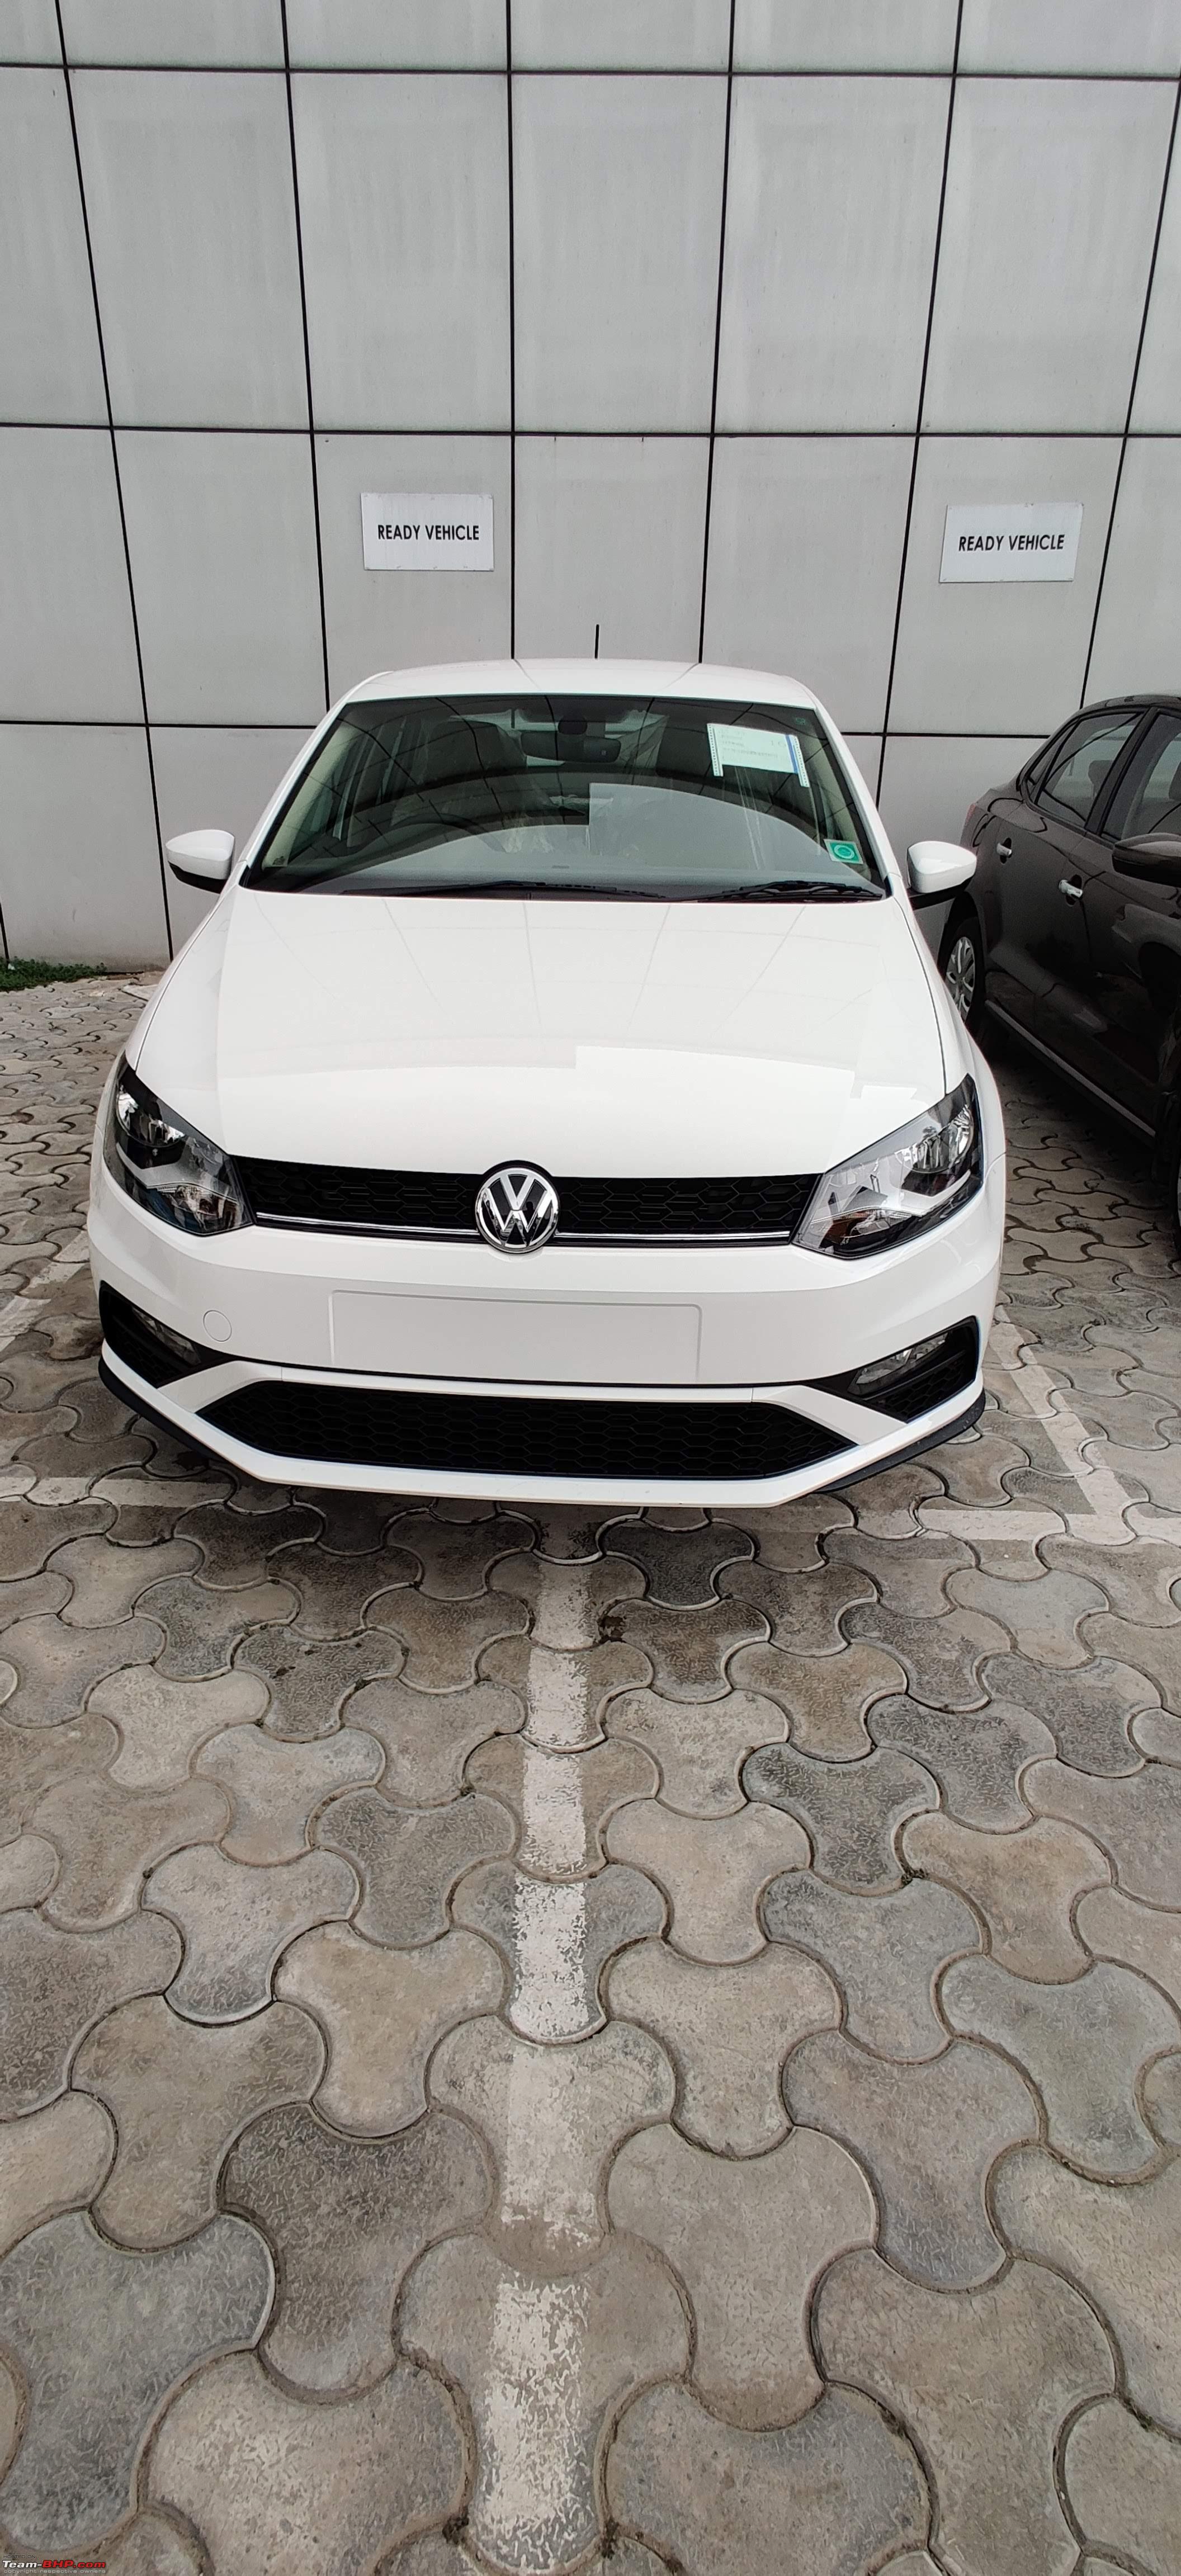 Volkswagen Polo, Vento 1.0L TSI Highline Plus prices reduced - Page 3 -  Team-BHP